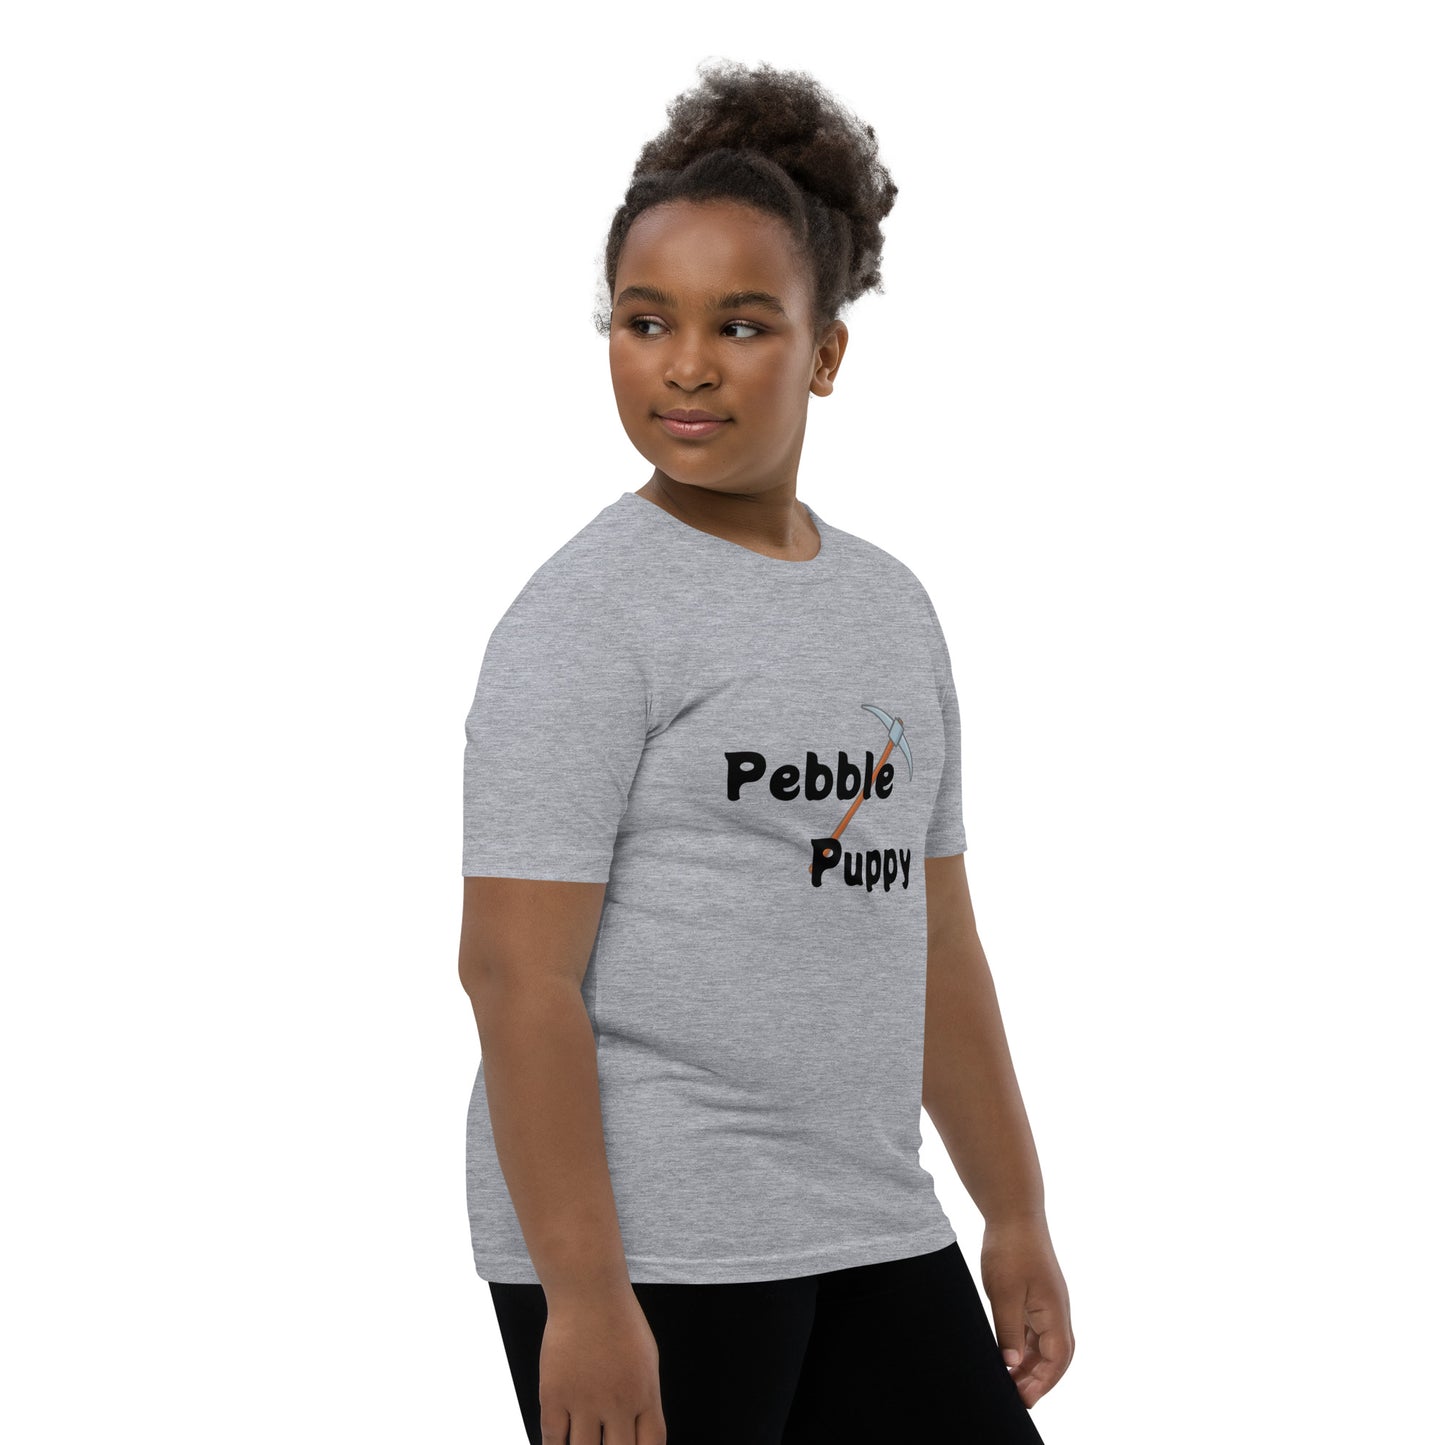 'Pebble Puppy' Youth Short Sleeve T-Shirt